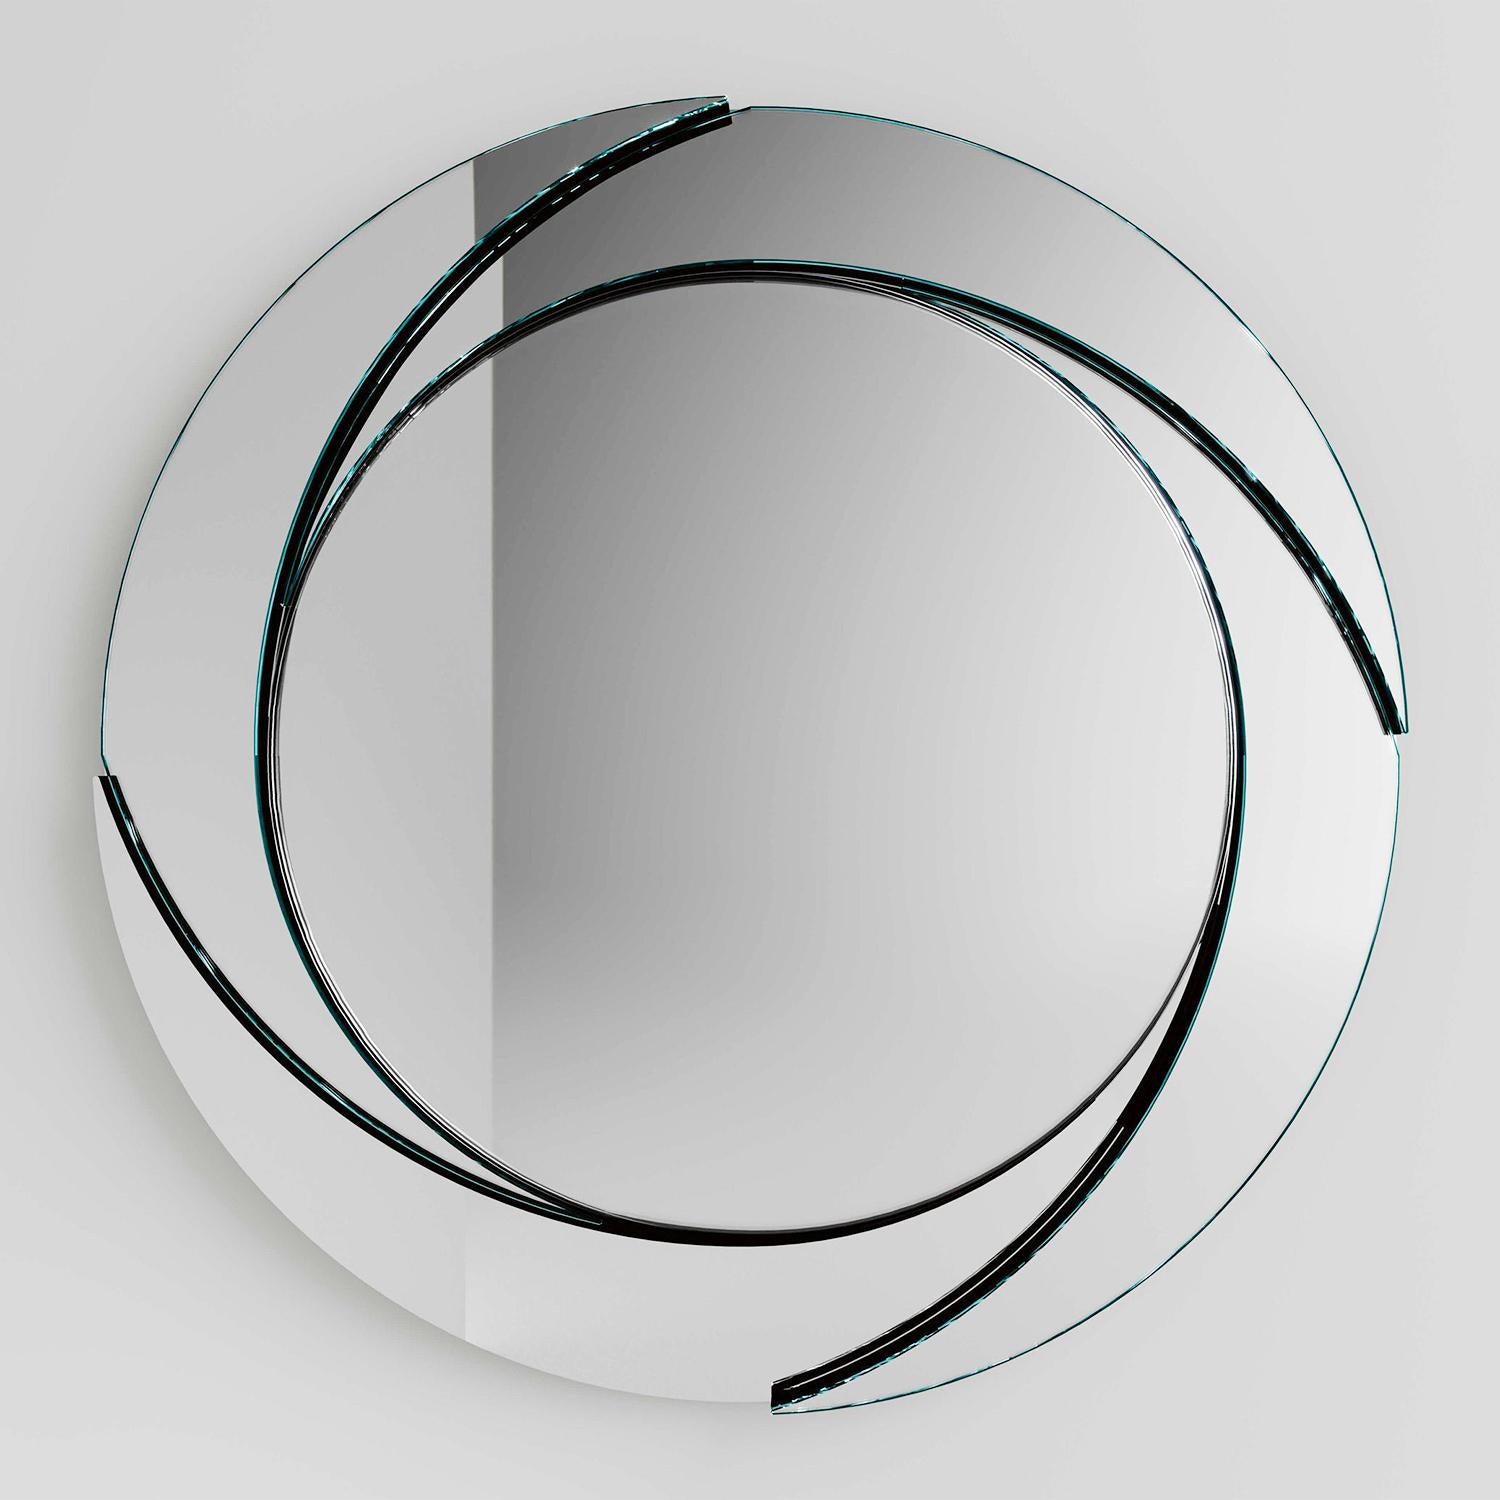 Mirror tierra glass all in mirror glass and 
with wooden structure in black finish.